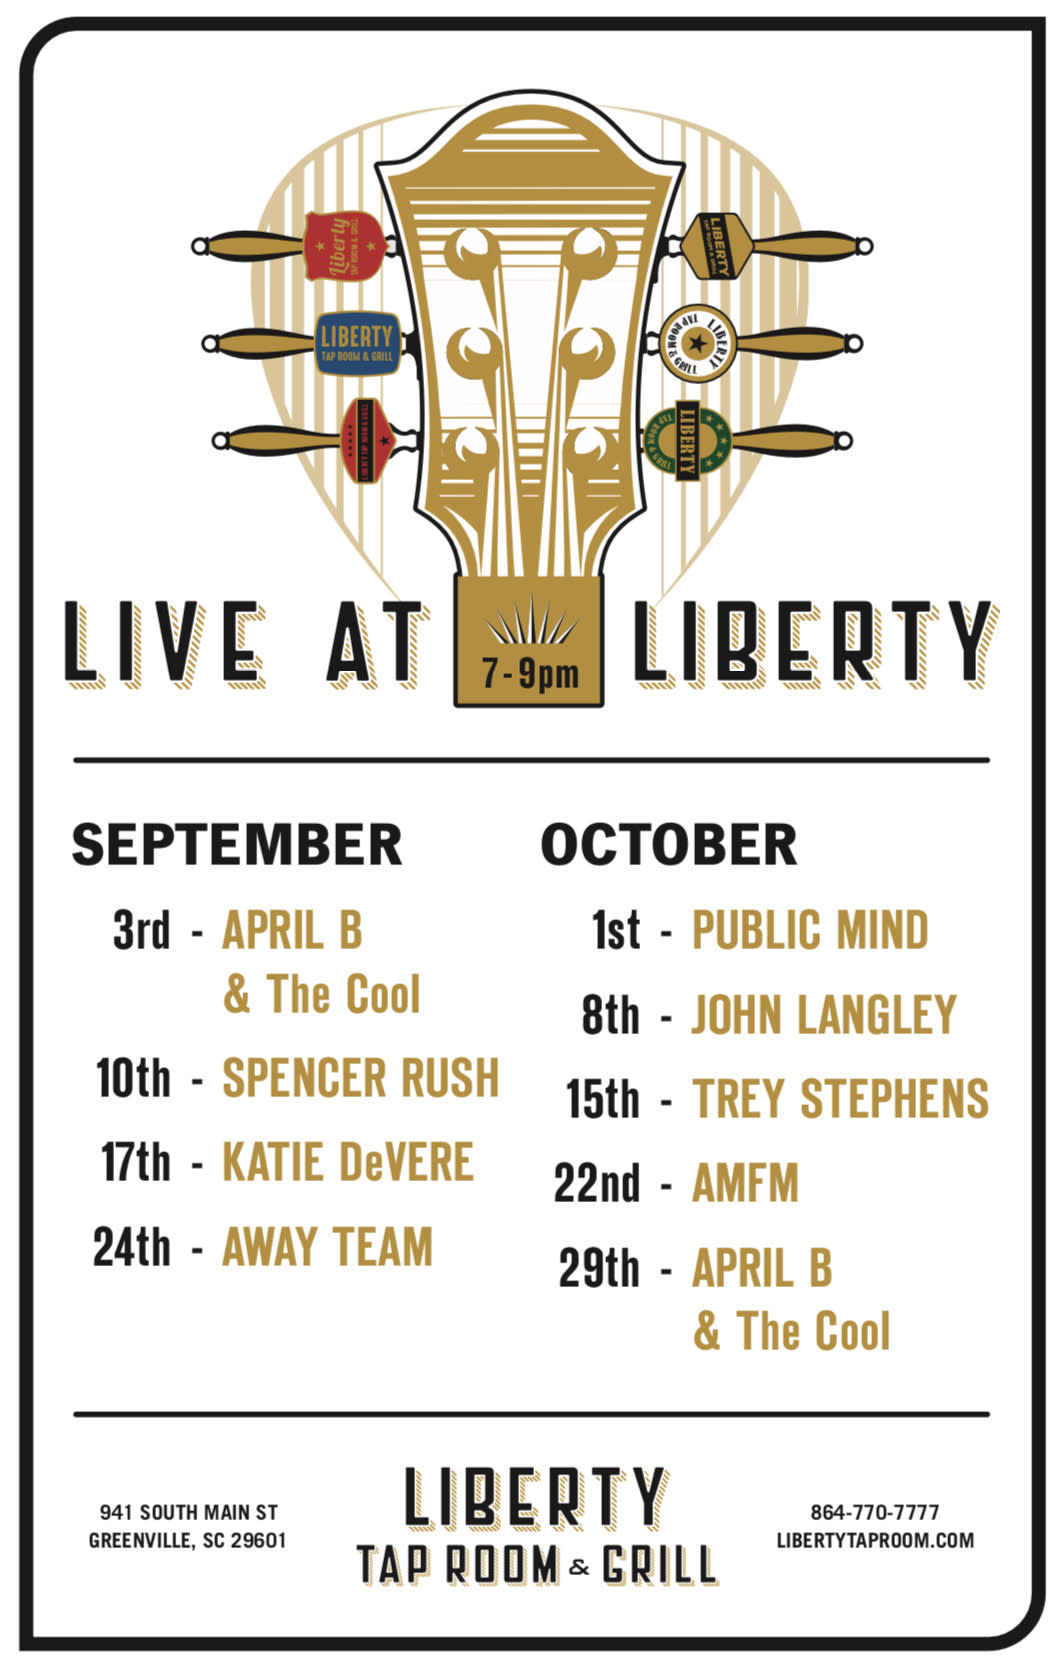 Live Music At Liberty Tap Room